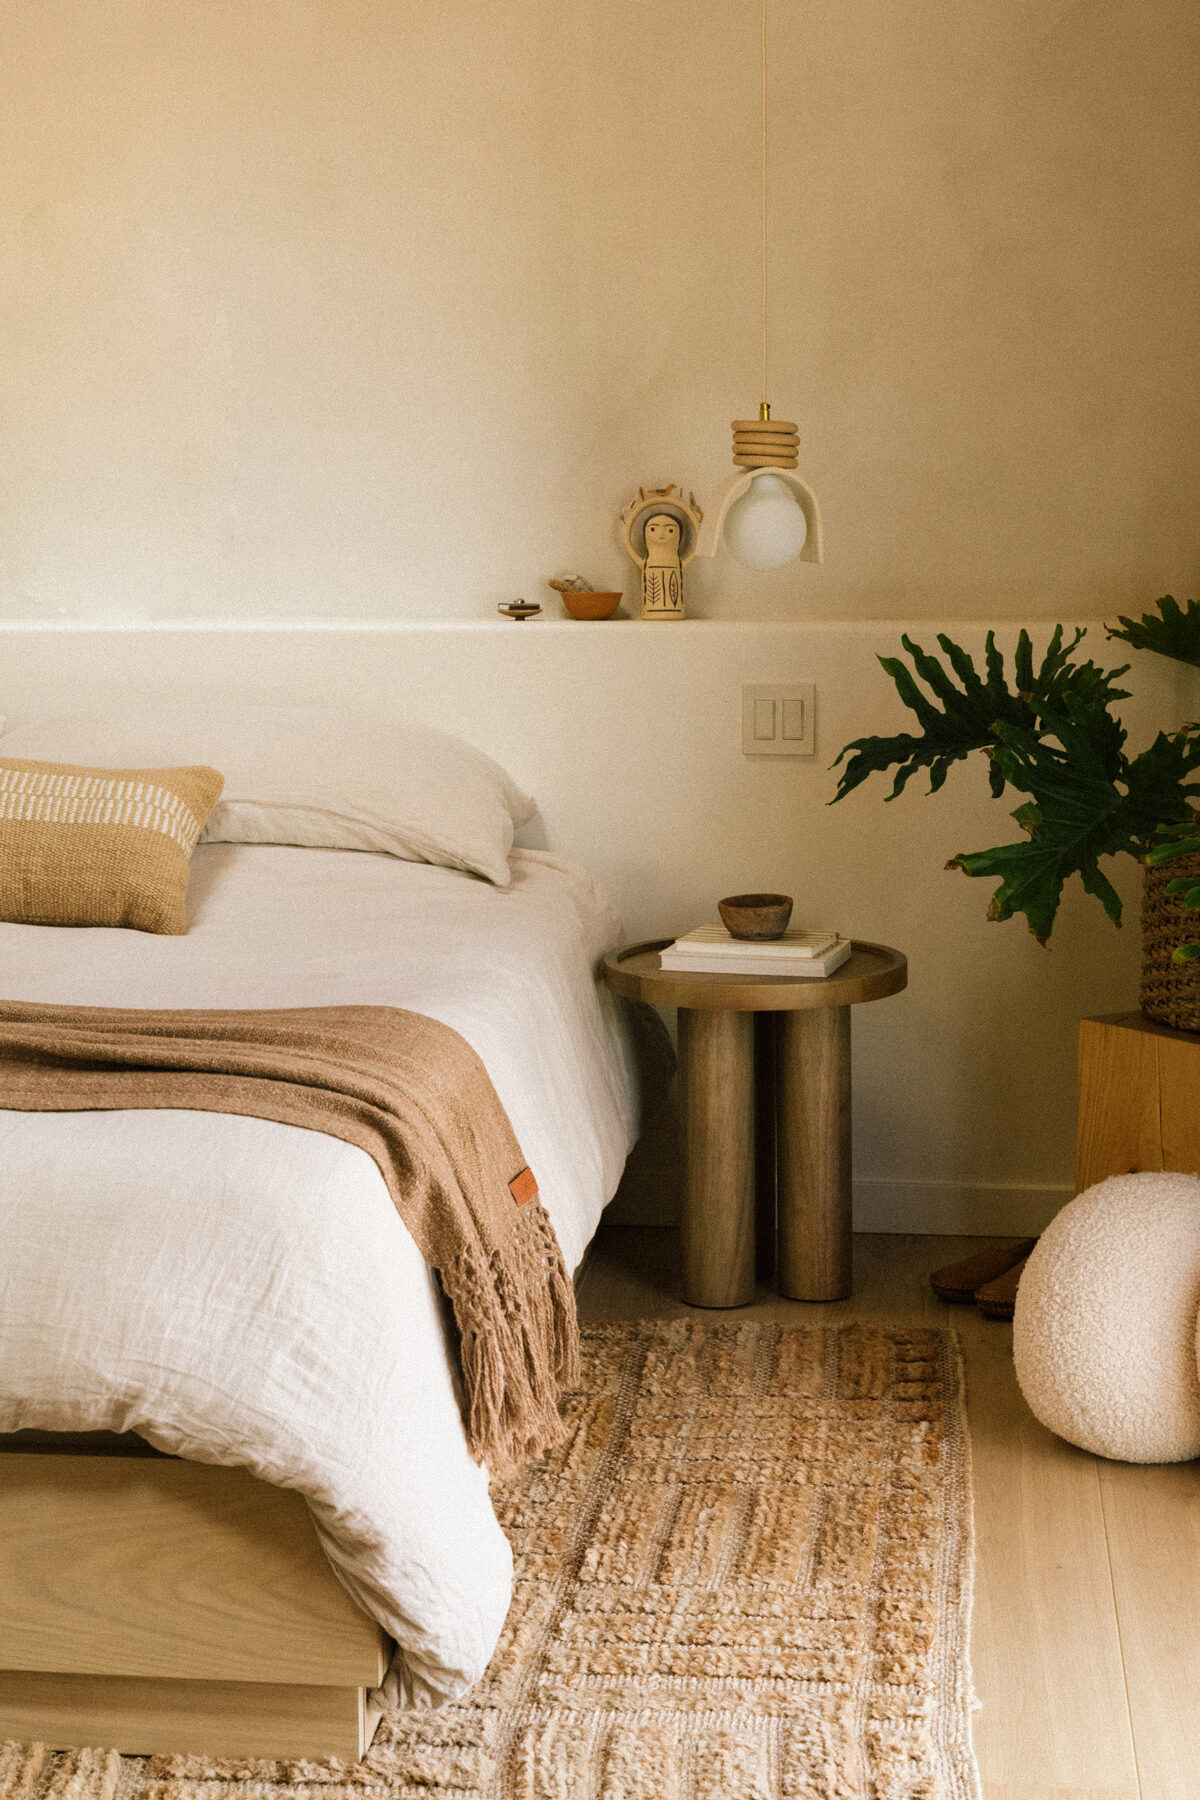 How to Create a Cozy and Earthy Bedroom